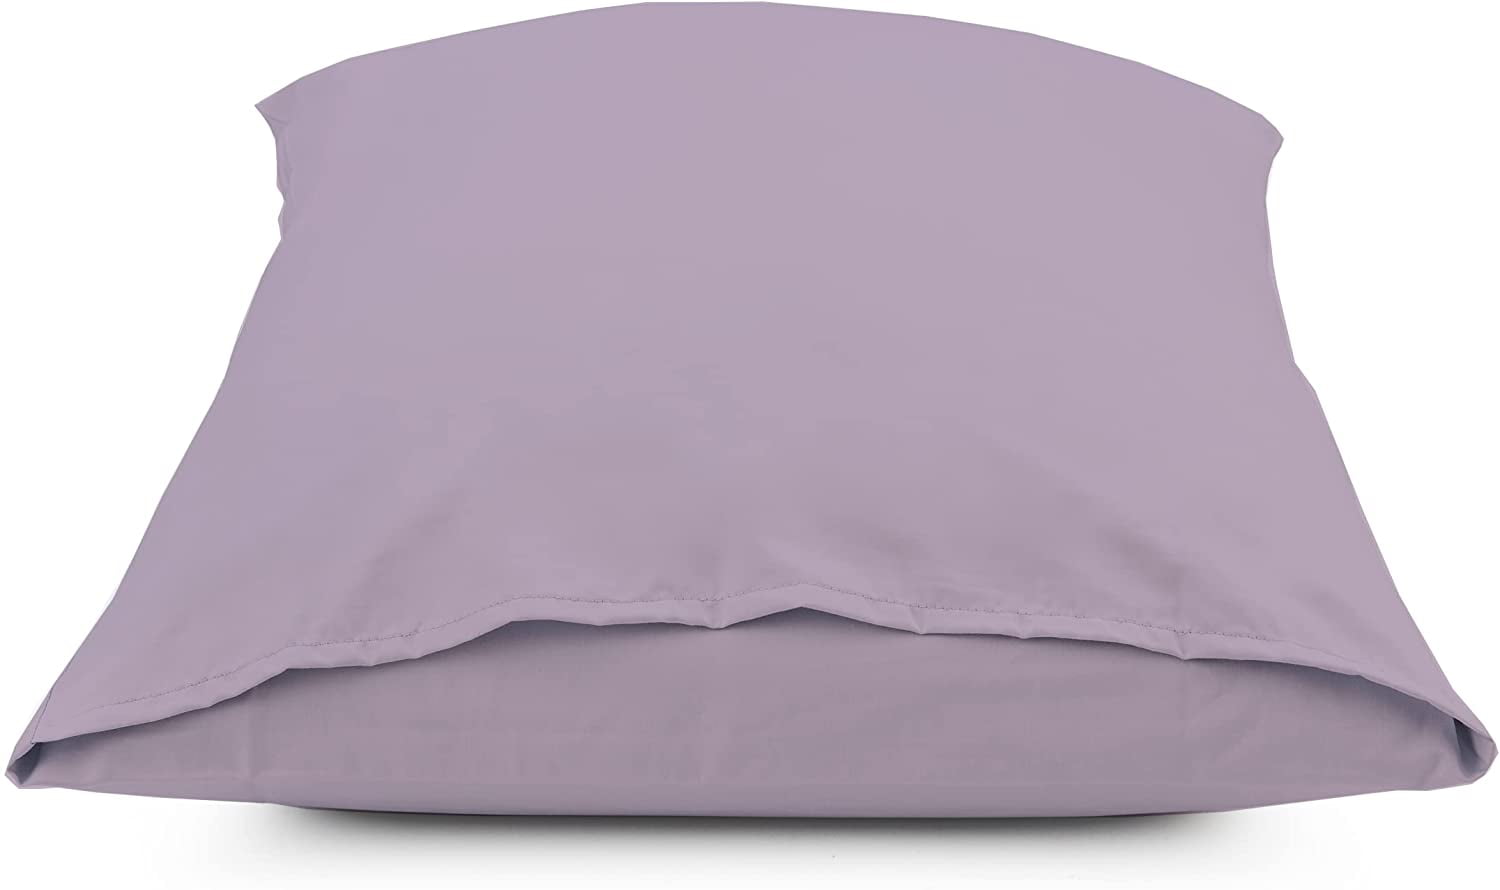 CirclesHome Light Gray Pillowcases Queen Size - Smooth 300 Thread Count  Sateen Poly Cotton Envelope Pillow Cases - Machine Washable & Wrinkle  Resistant (Light Gray, Queen 20x30) 